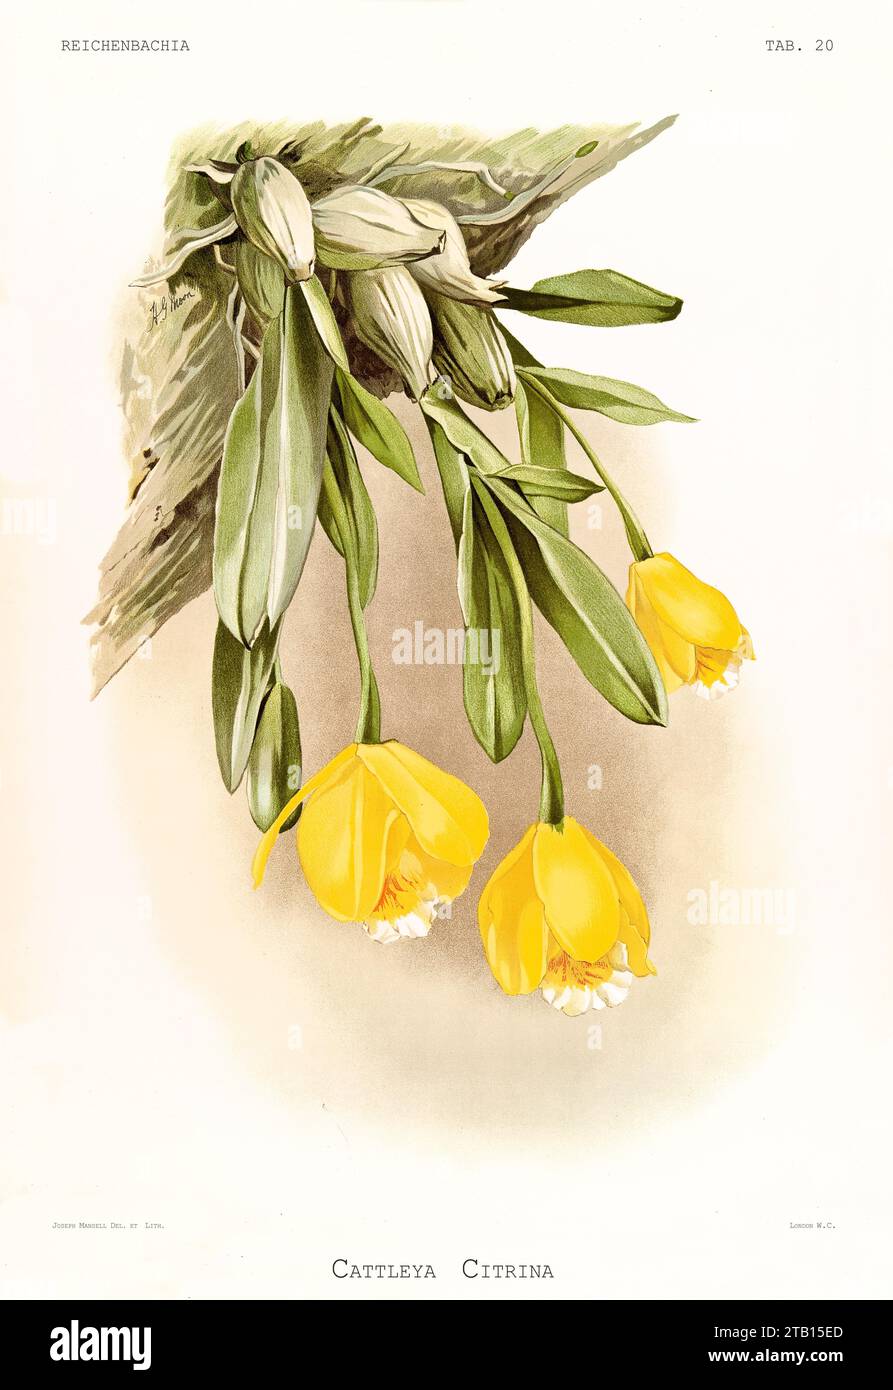 Old illustration of  Tulip Orchid (Encyclia citrina). Reichenbachia, by F. Sander. St. Albans, UK, 1888 - 1894 Stock Photo